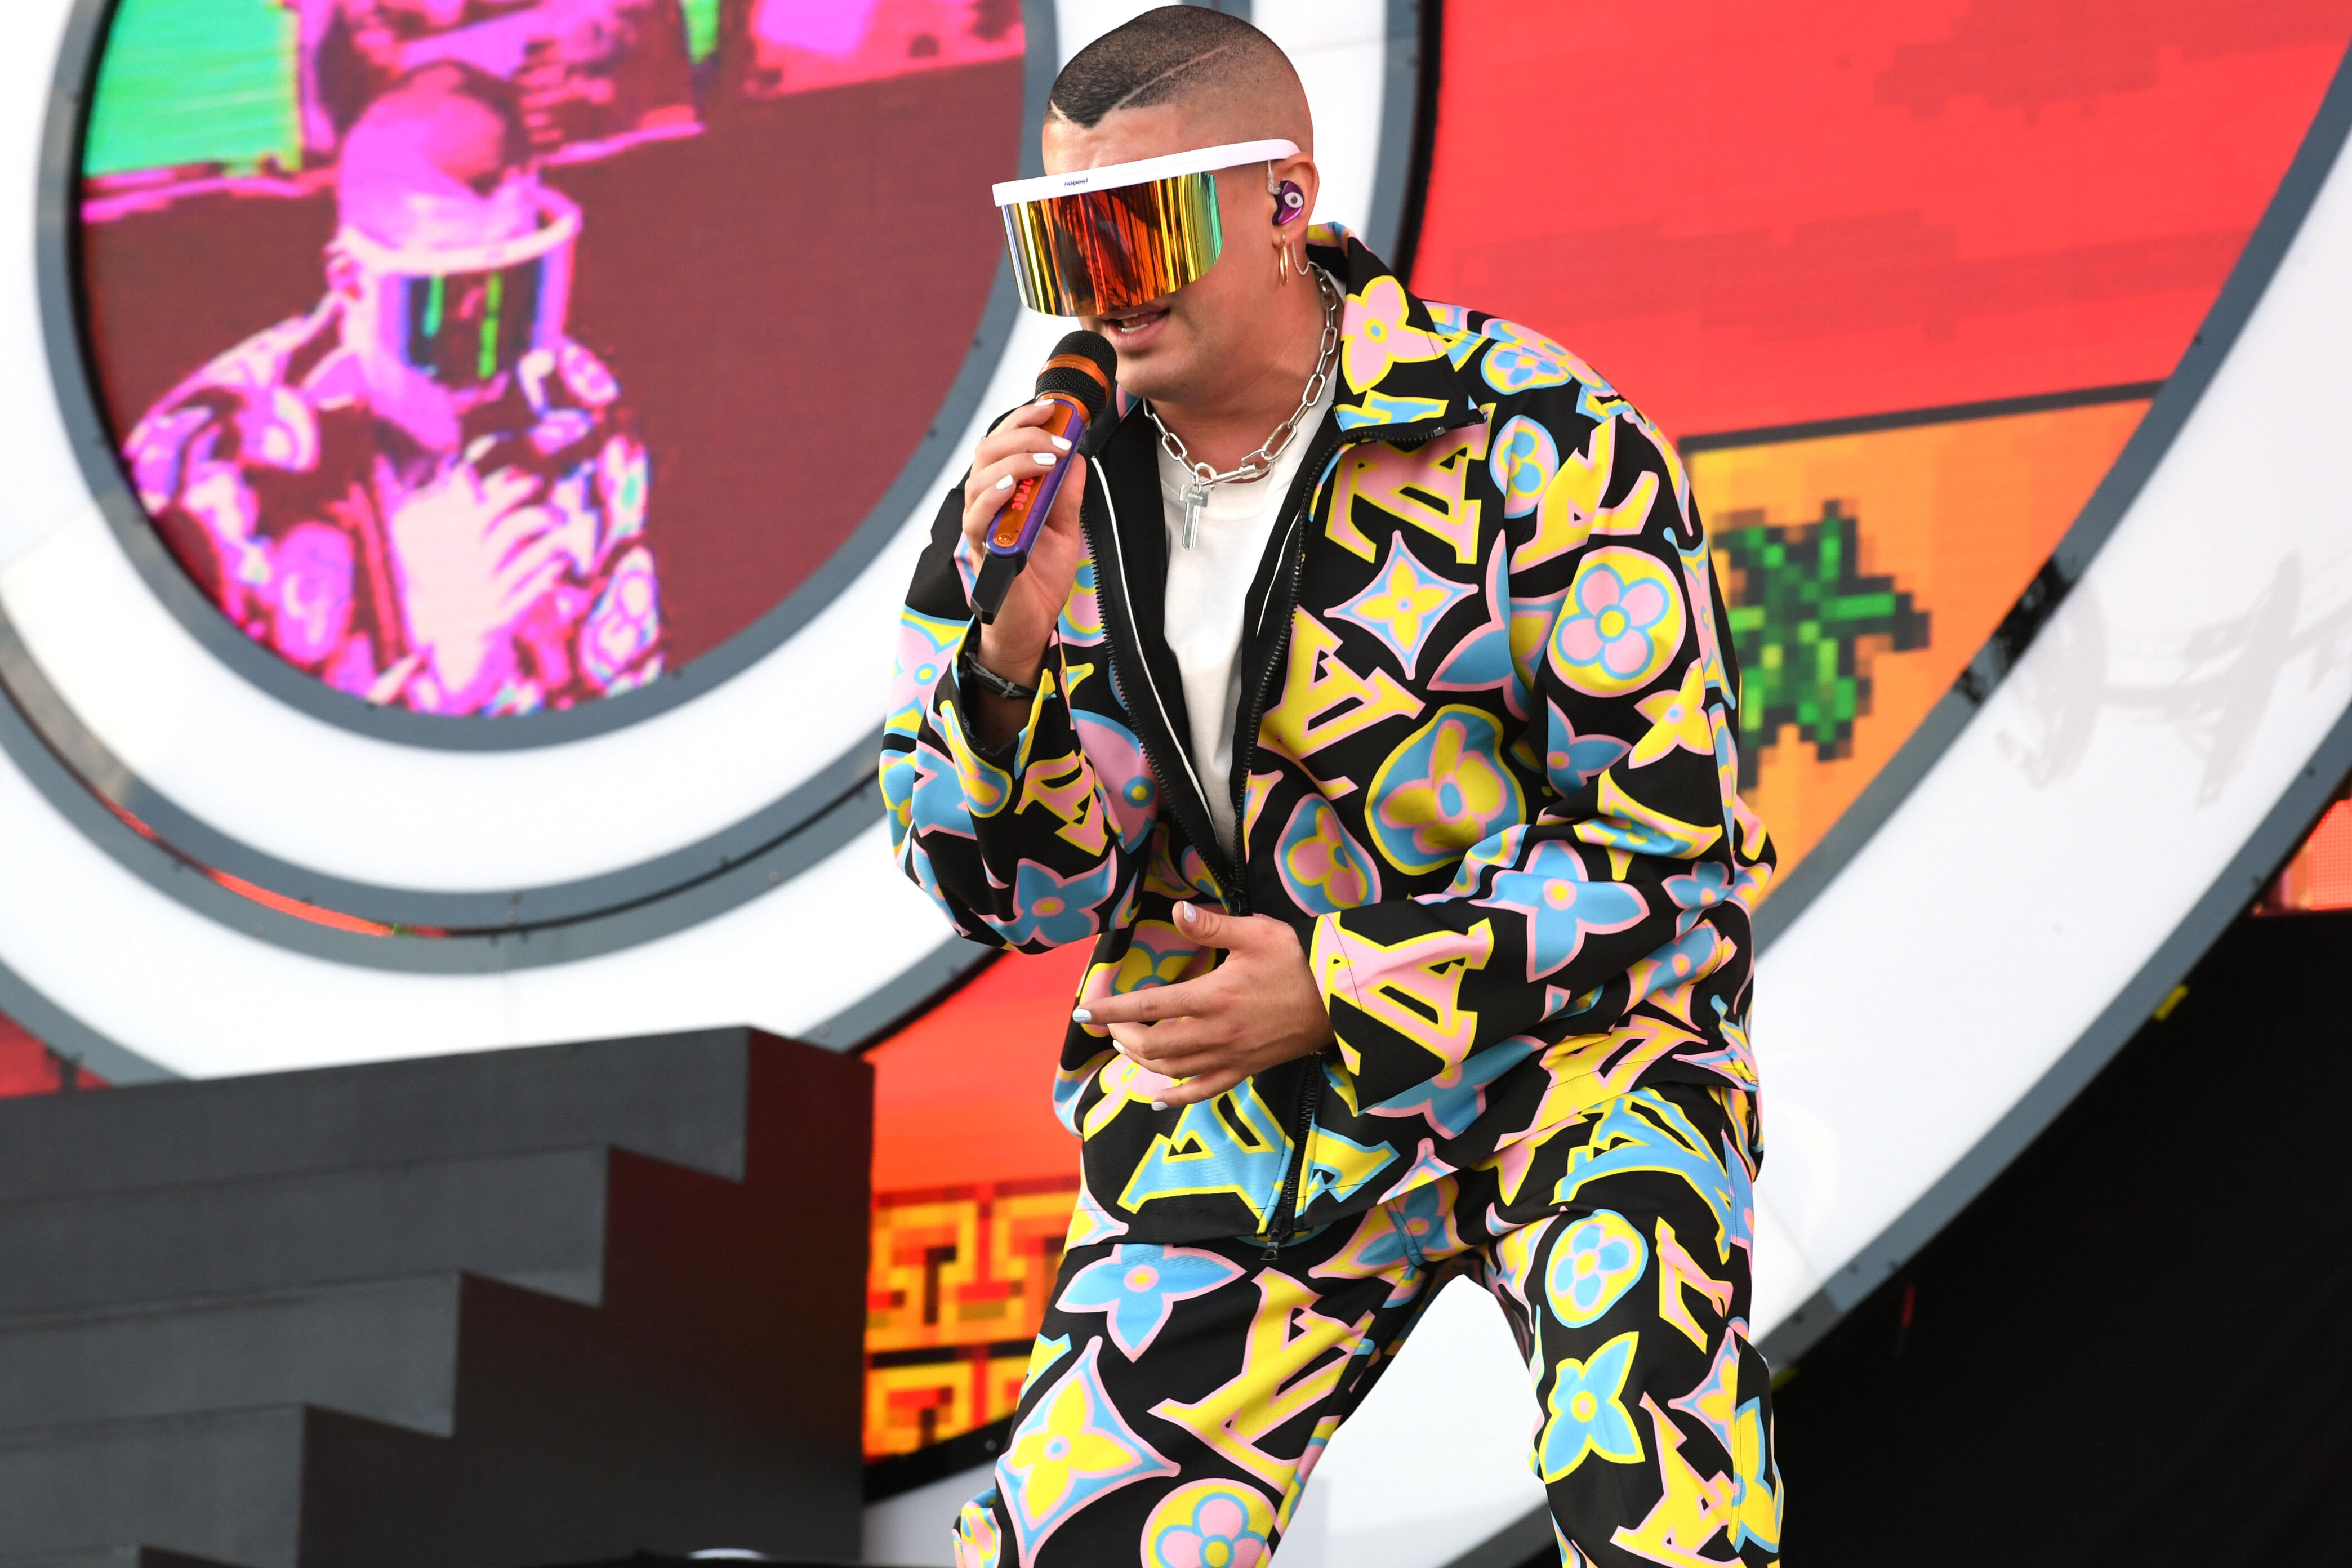 Bad Bunny Brought Out J Balvin For an Epic Coachella 2019 Performance